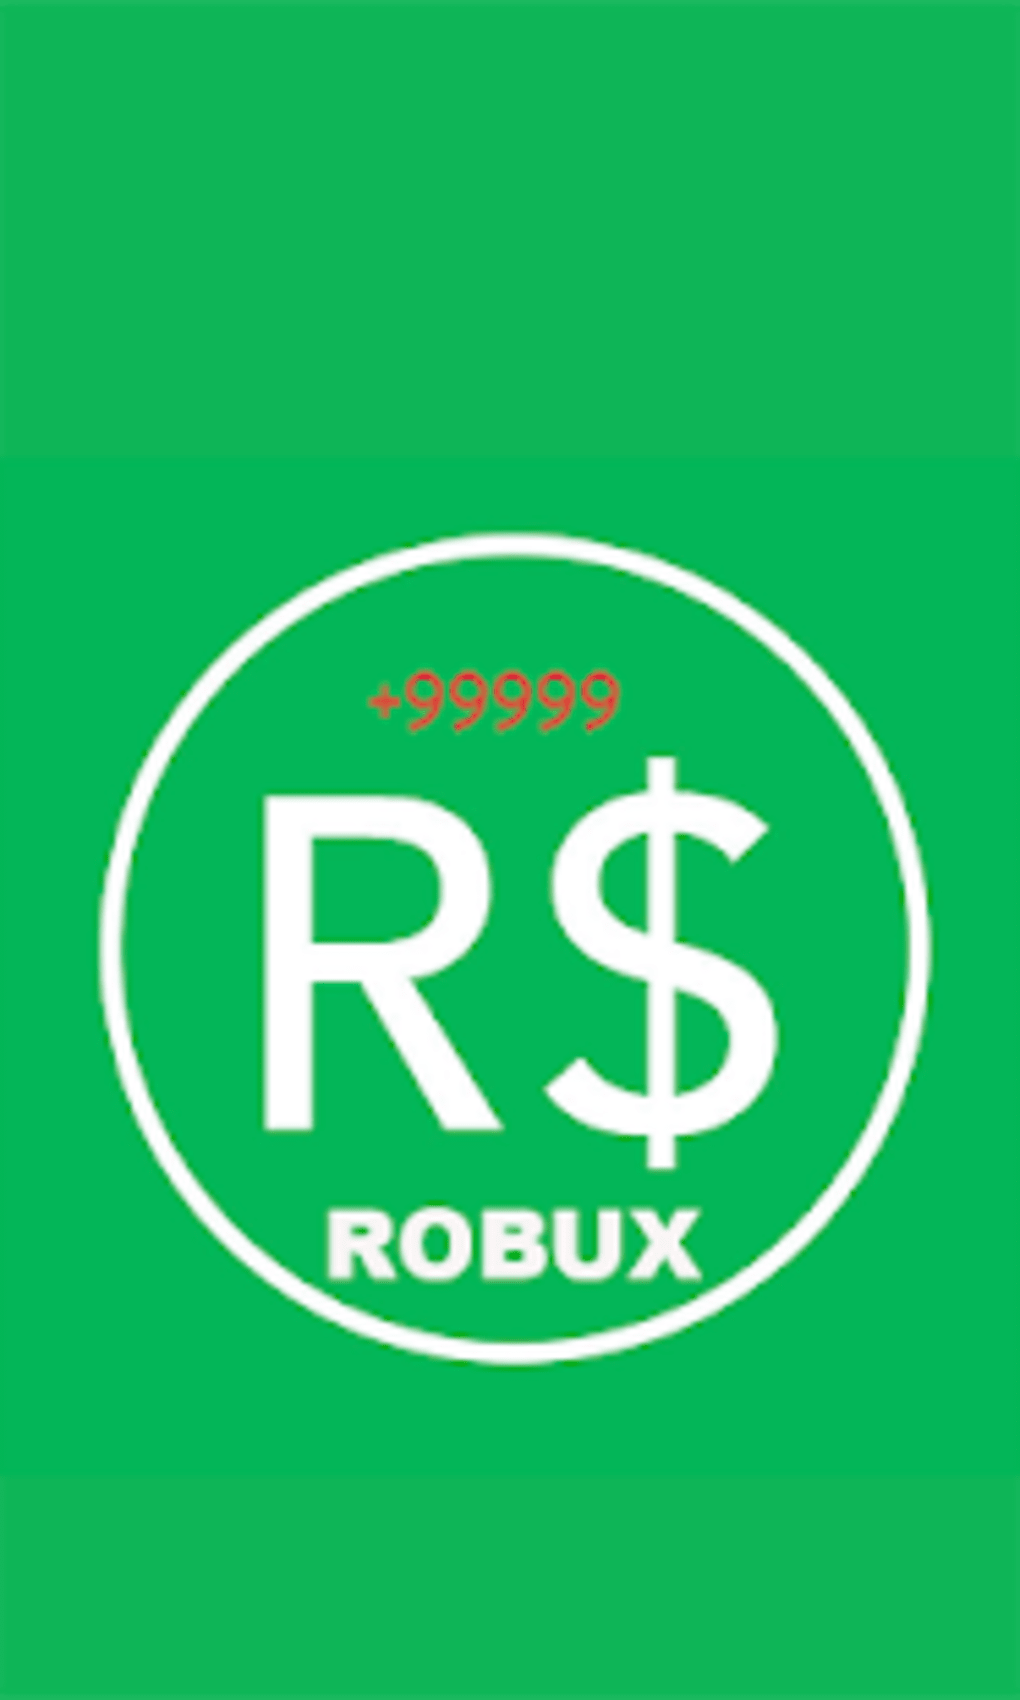 New Free Robux Guide And Tips For Android Download - download get free robux guide ultimate new tips 2019